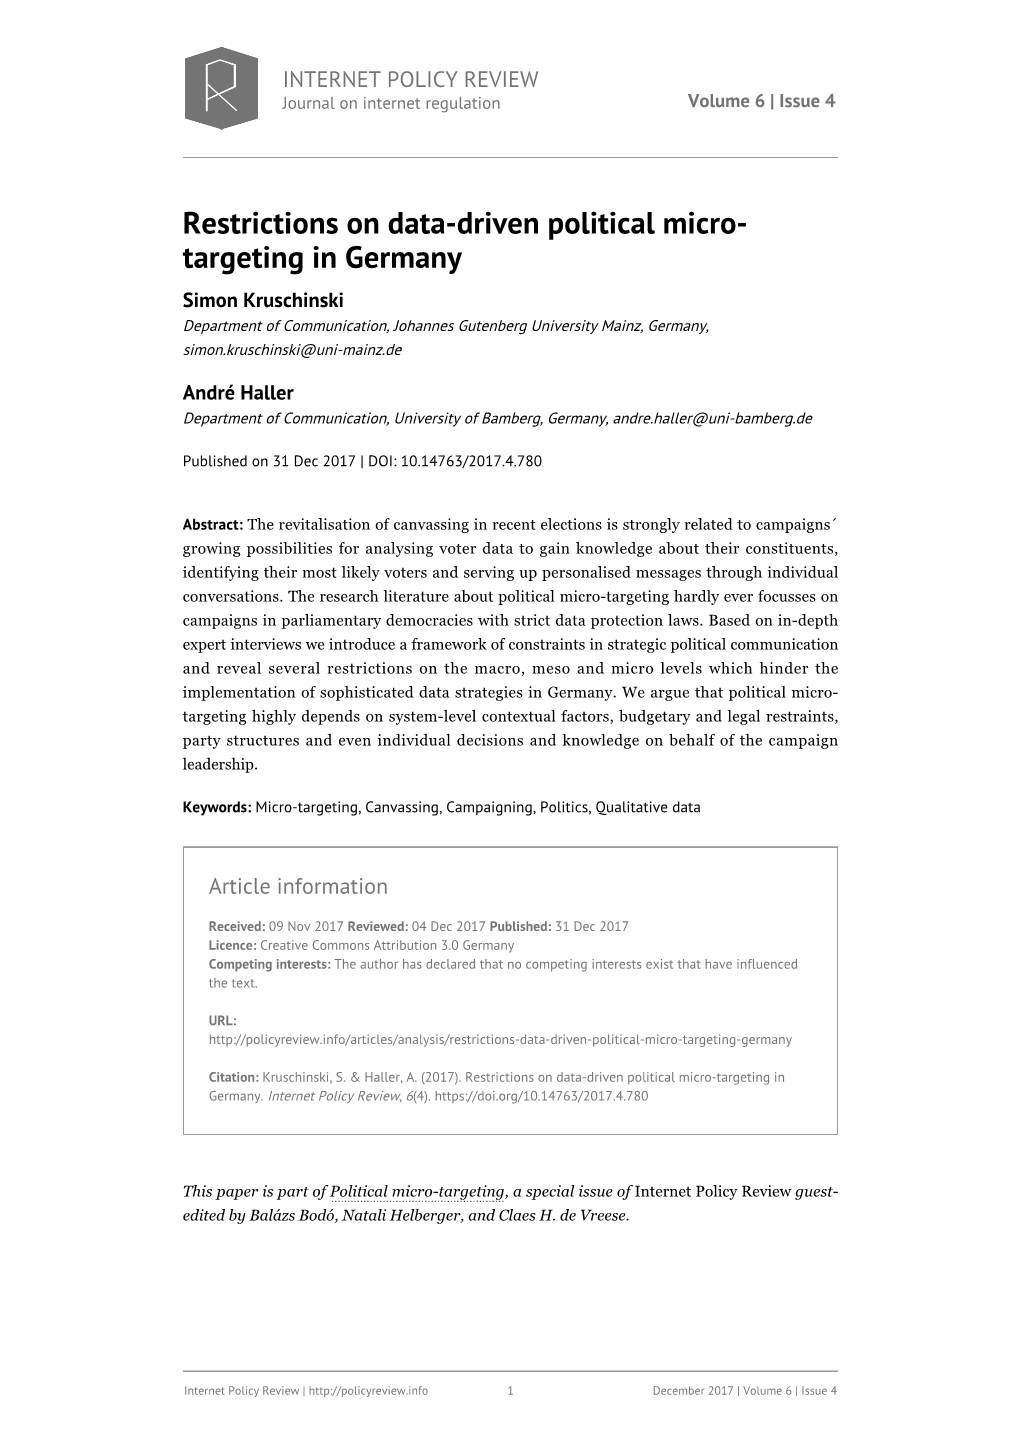 Restrictions on Data-Driven Political Micro- Targeting in Germany